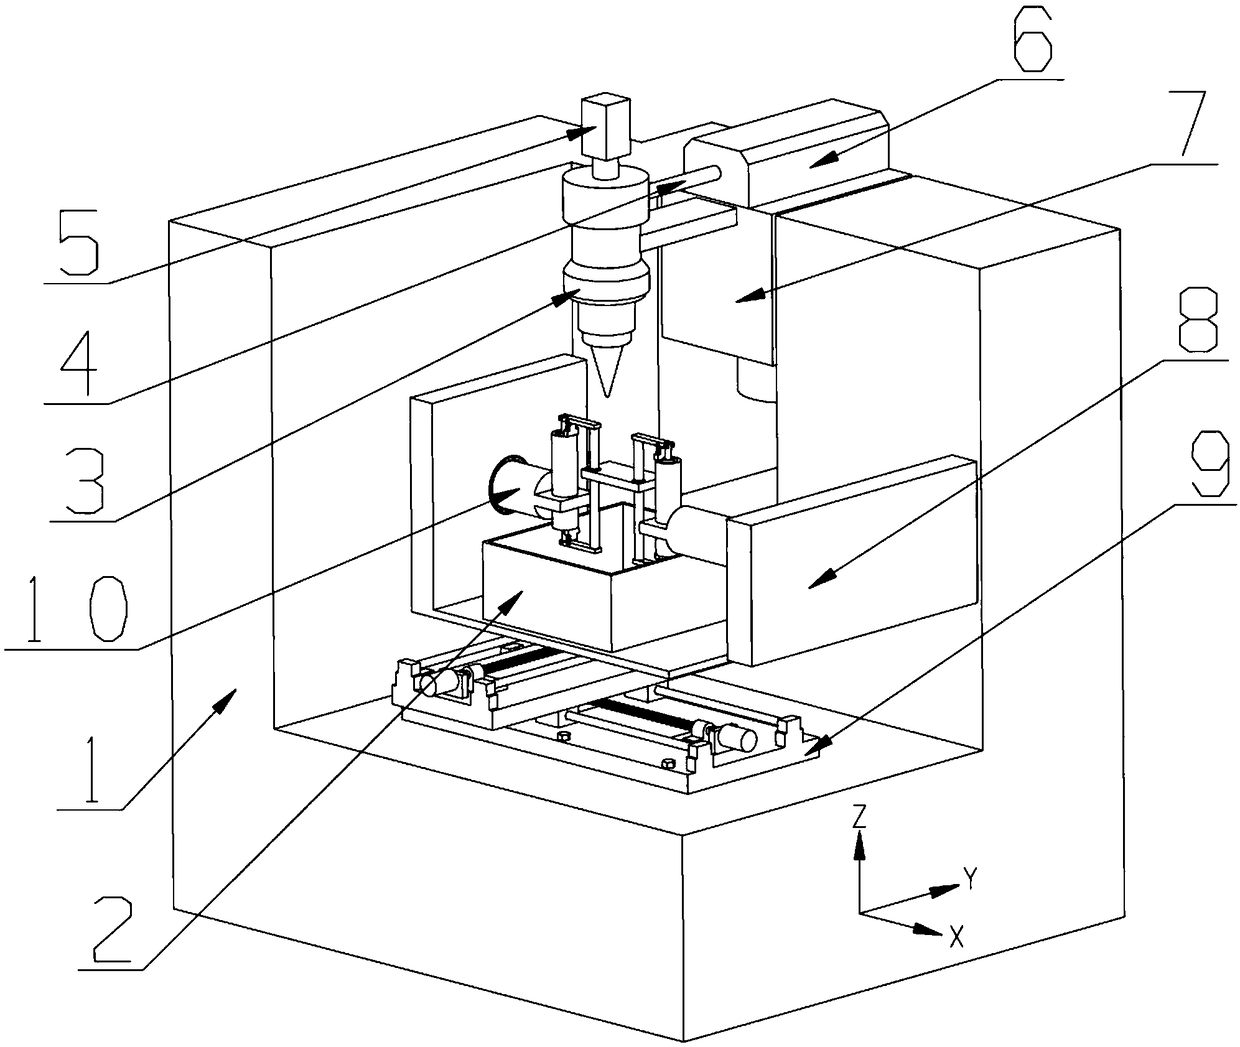 A laser drilling device and method for improving hole taper and inner wall quality